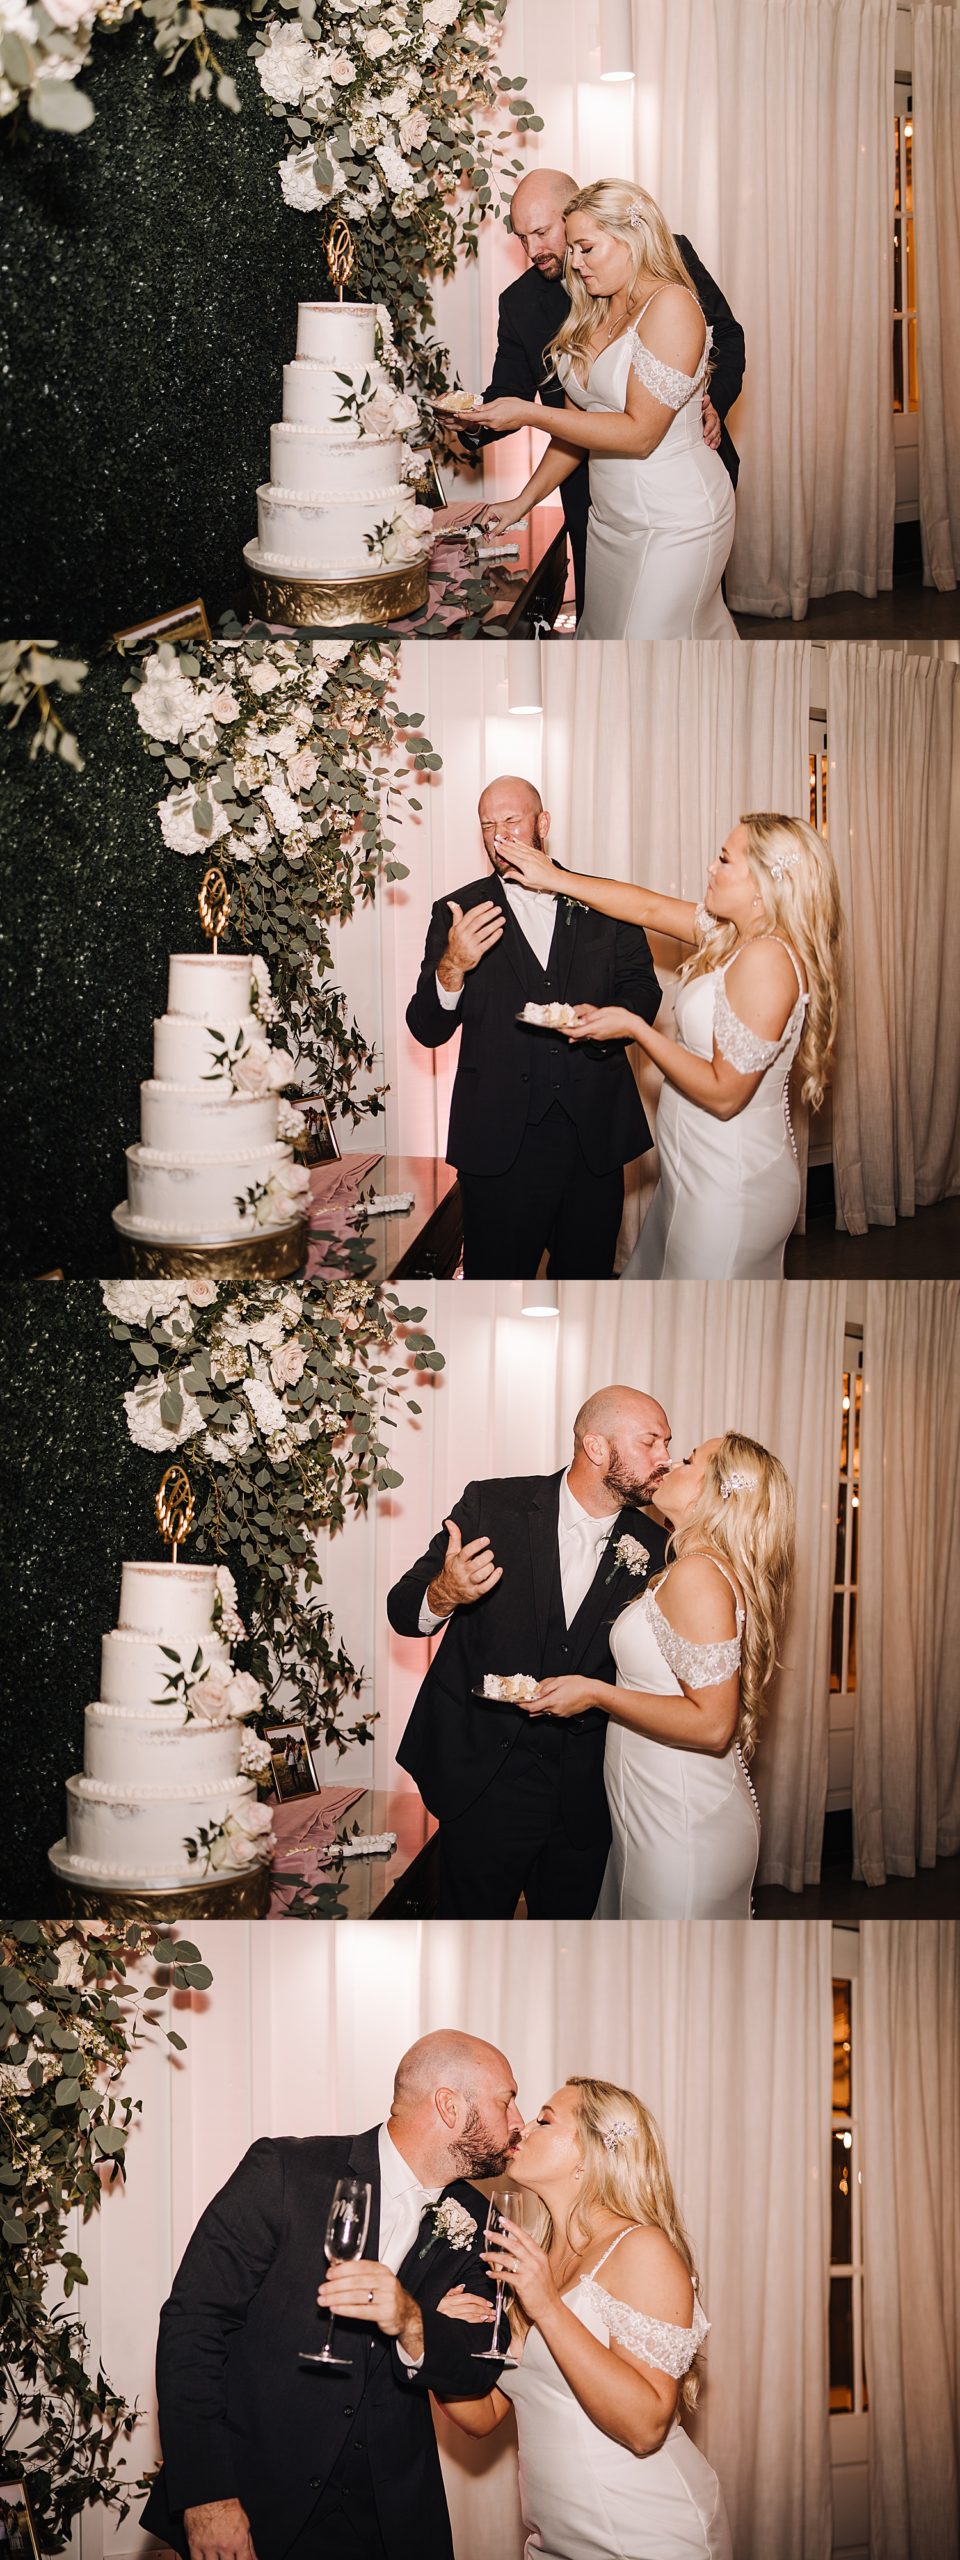 Bride and groom cut wedding cake and smash cake in each others faces 